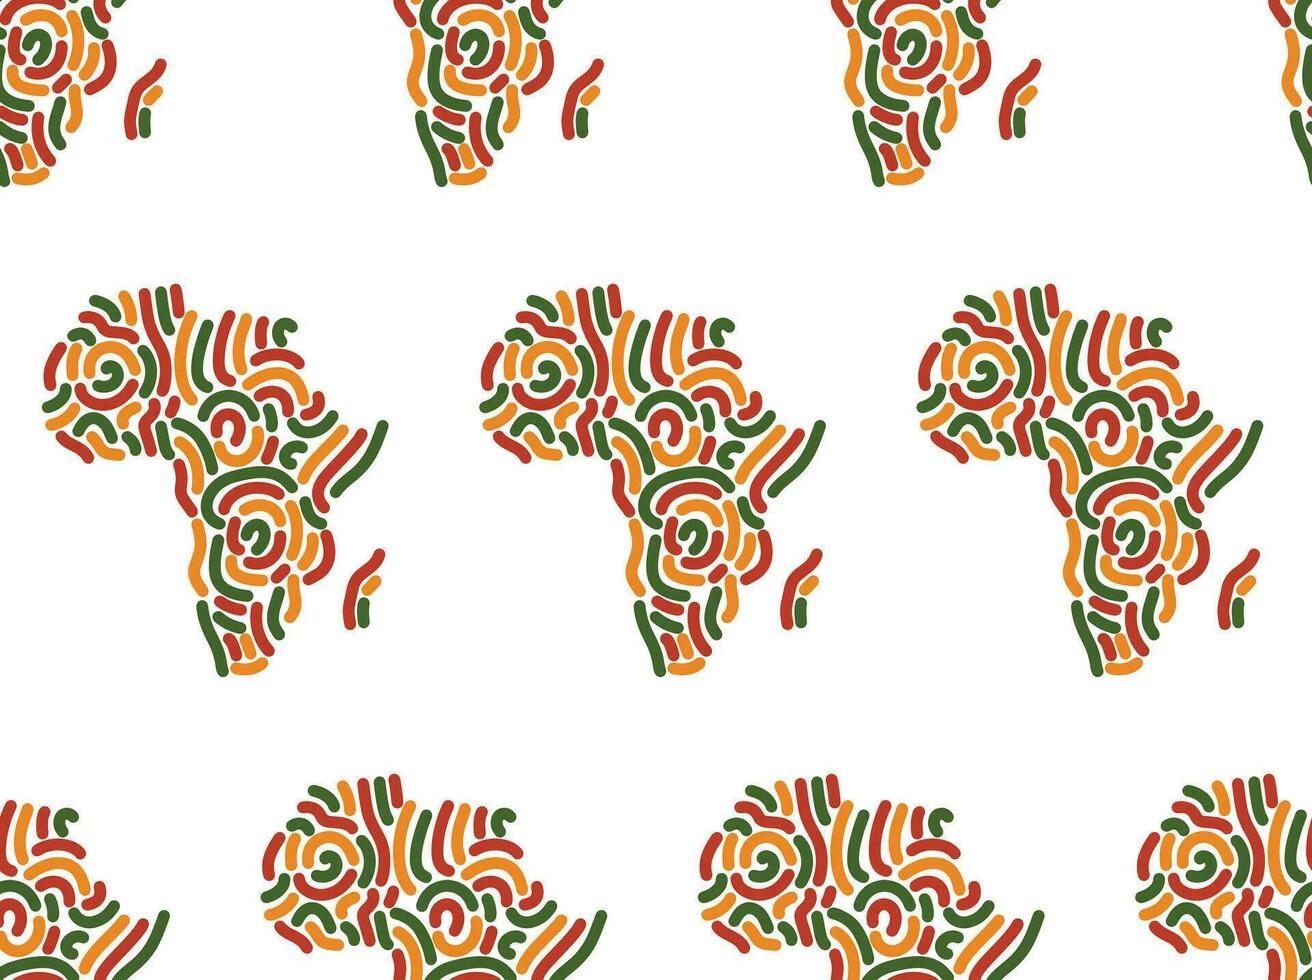 Seamless pattern background, decorative symbol Africa map, silhouette of African continent with abstract lines ornament in color of Pan African flag - red, yellow, green. vector